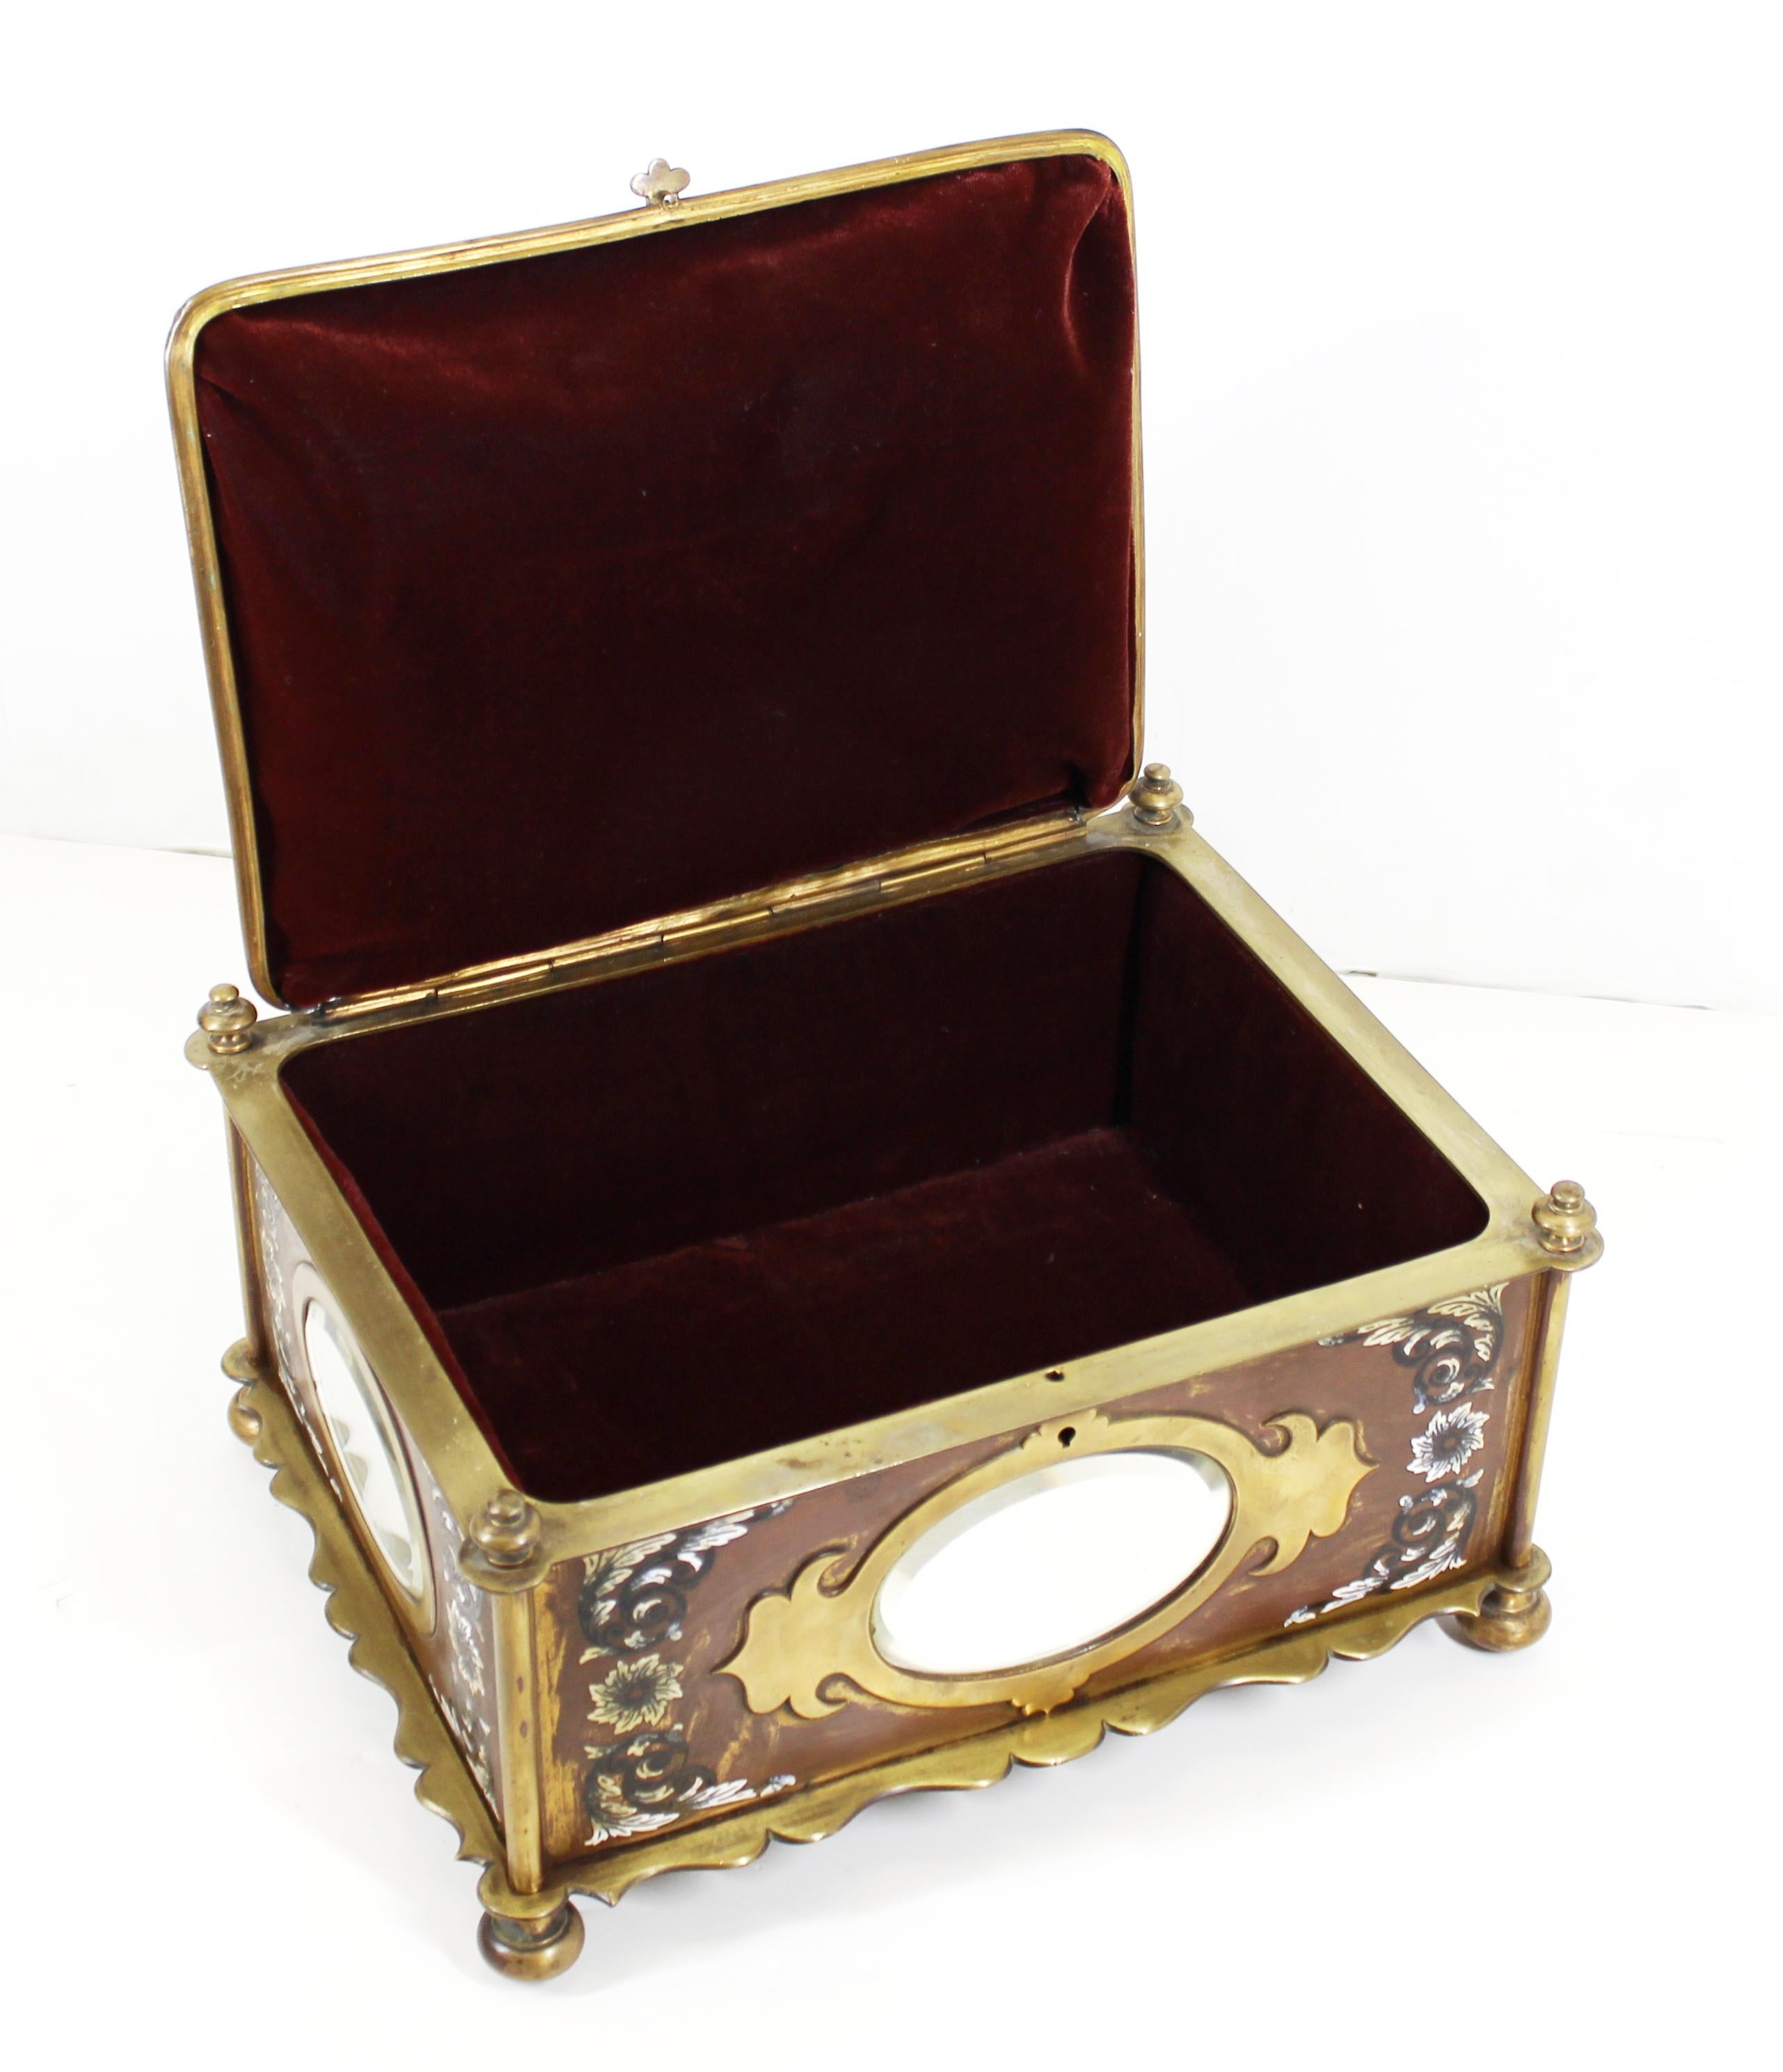 French Renaissance Revival Champleve Enamel Jewelry Box with Oval Mirror Inserts For Sale 4